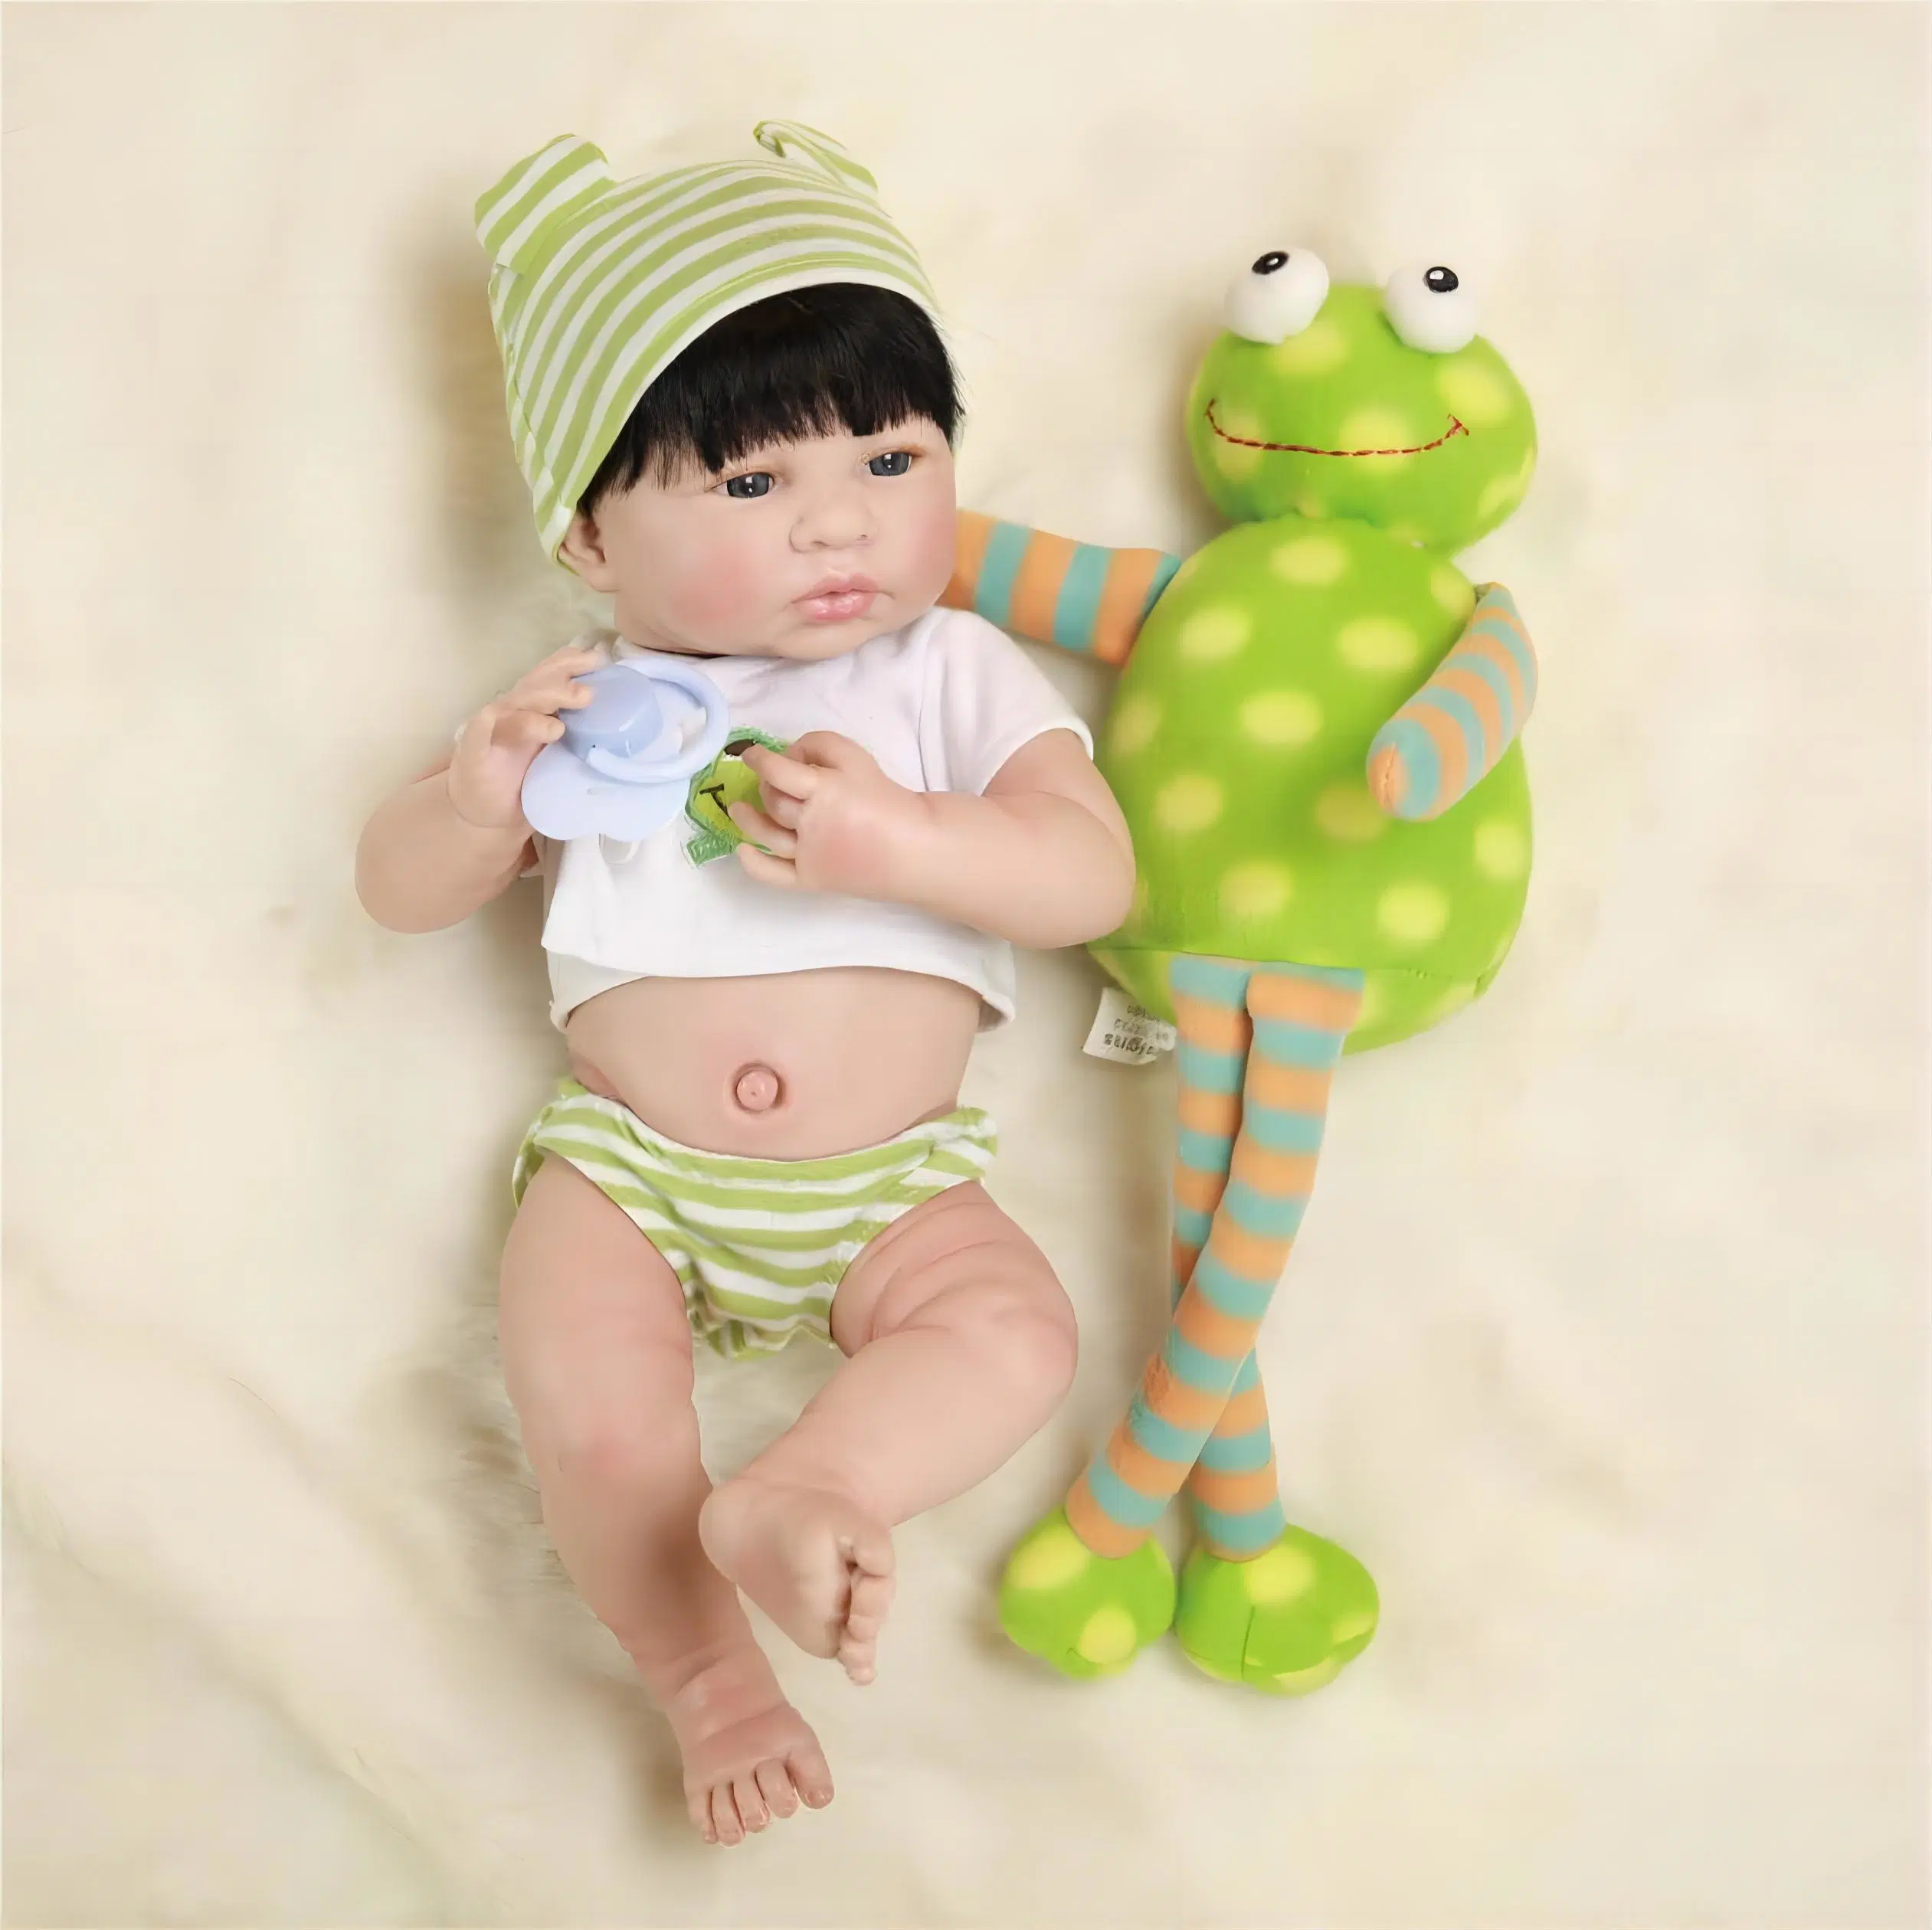 OEM Factory Customized Reborn Baby Dolls Realistic Silicone Doll Children Toy Vinyl Baby Dolls Baby Boy Doll Boy Girl Doll Gift Manufacturer in China